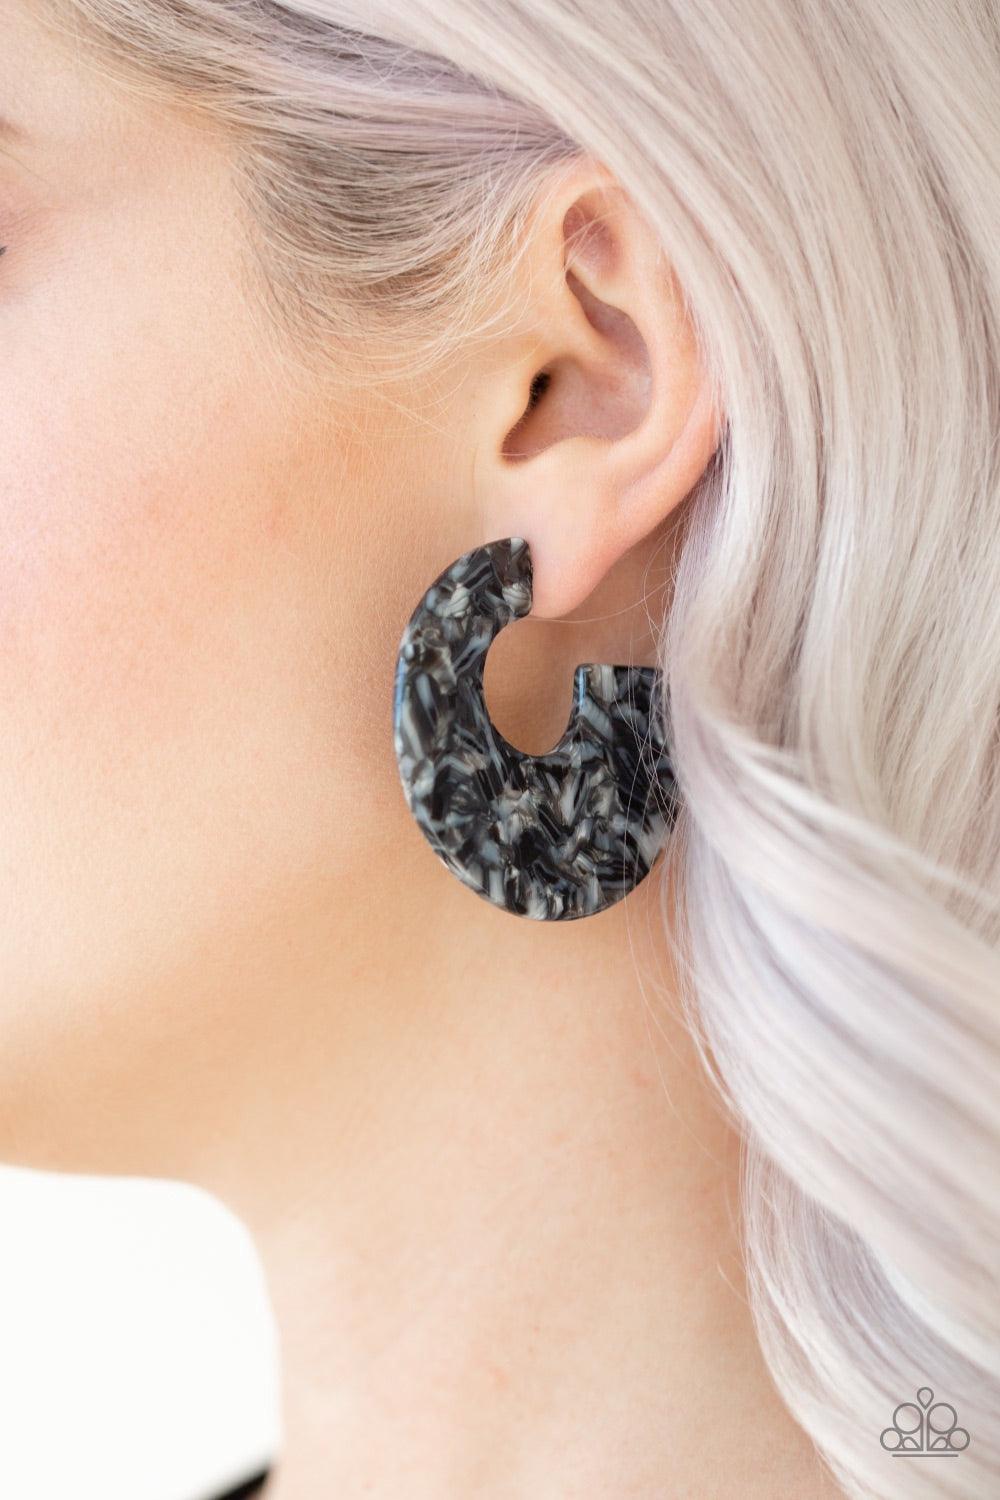 Paparazzi Accessories Tropically Torrid - Black Brushed in a colorful faux marble finish, a flat black hoop curls around the ear for a retro look. Earring attaches to a standard post fitting. Hoop measures 2" in diameter. Jewelry